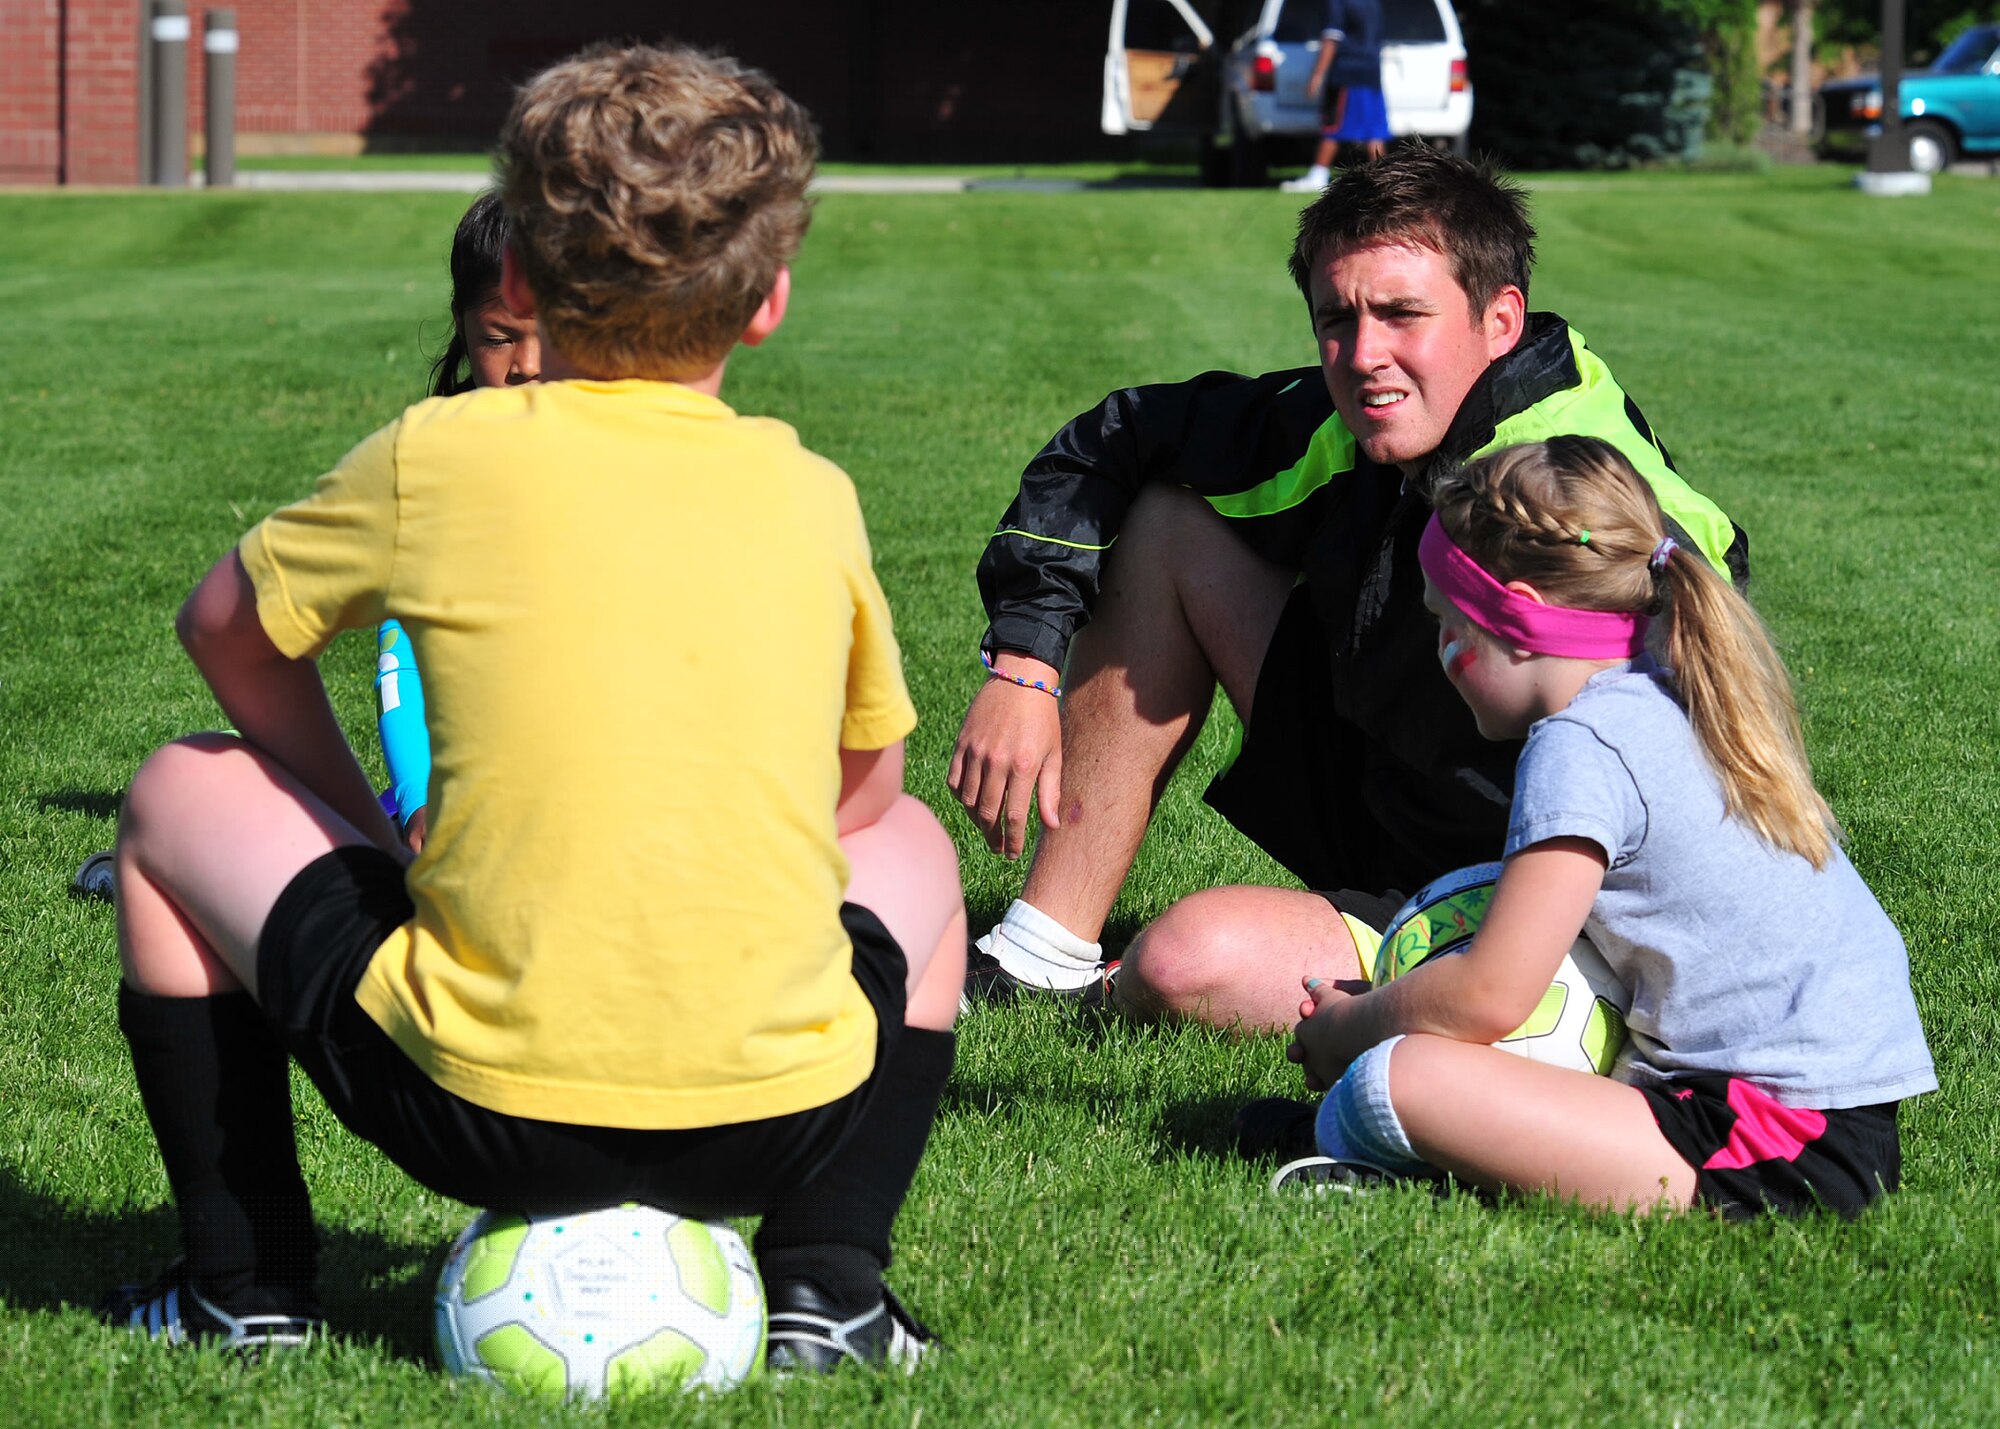 O’Brien takes a moment to get to know the kids before they start their soccer session Aug. 10. (U.S. Air Force photos/Staff Sgt. Michael Means)